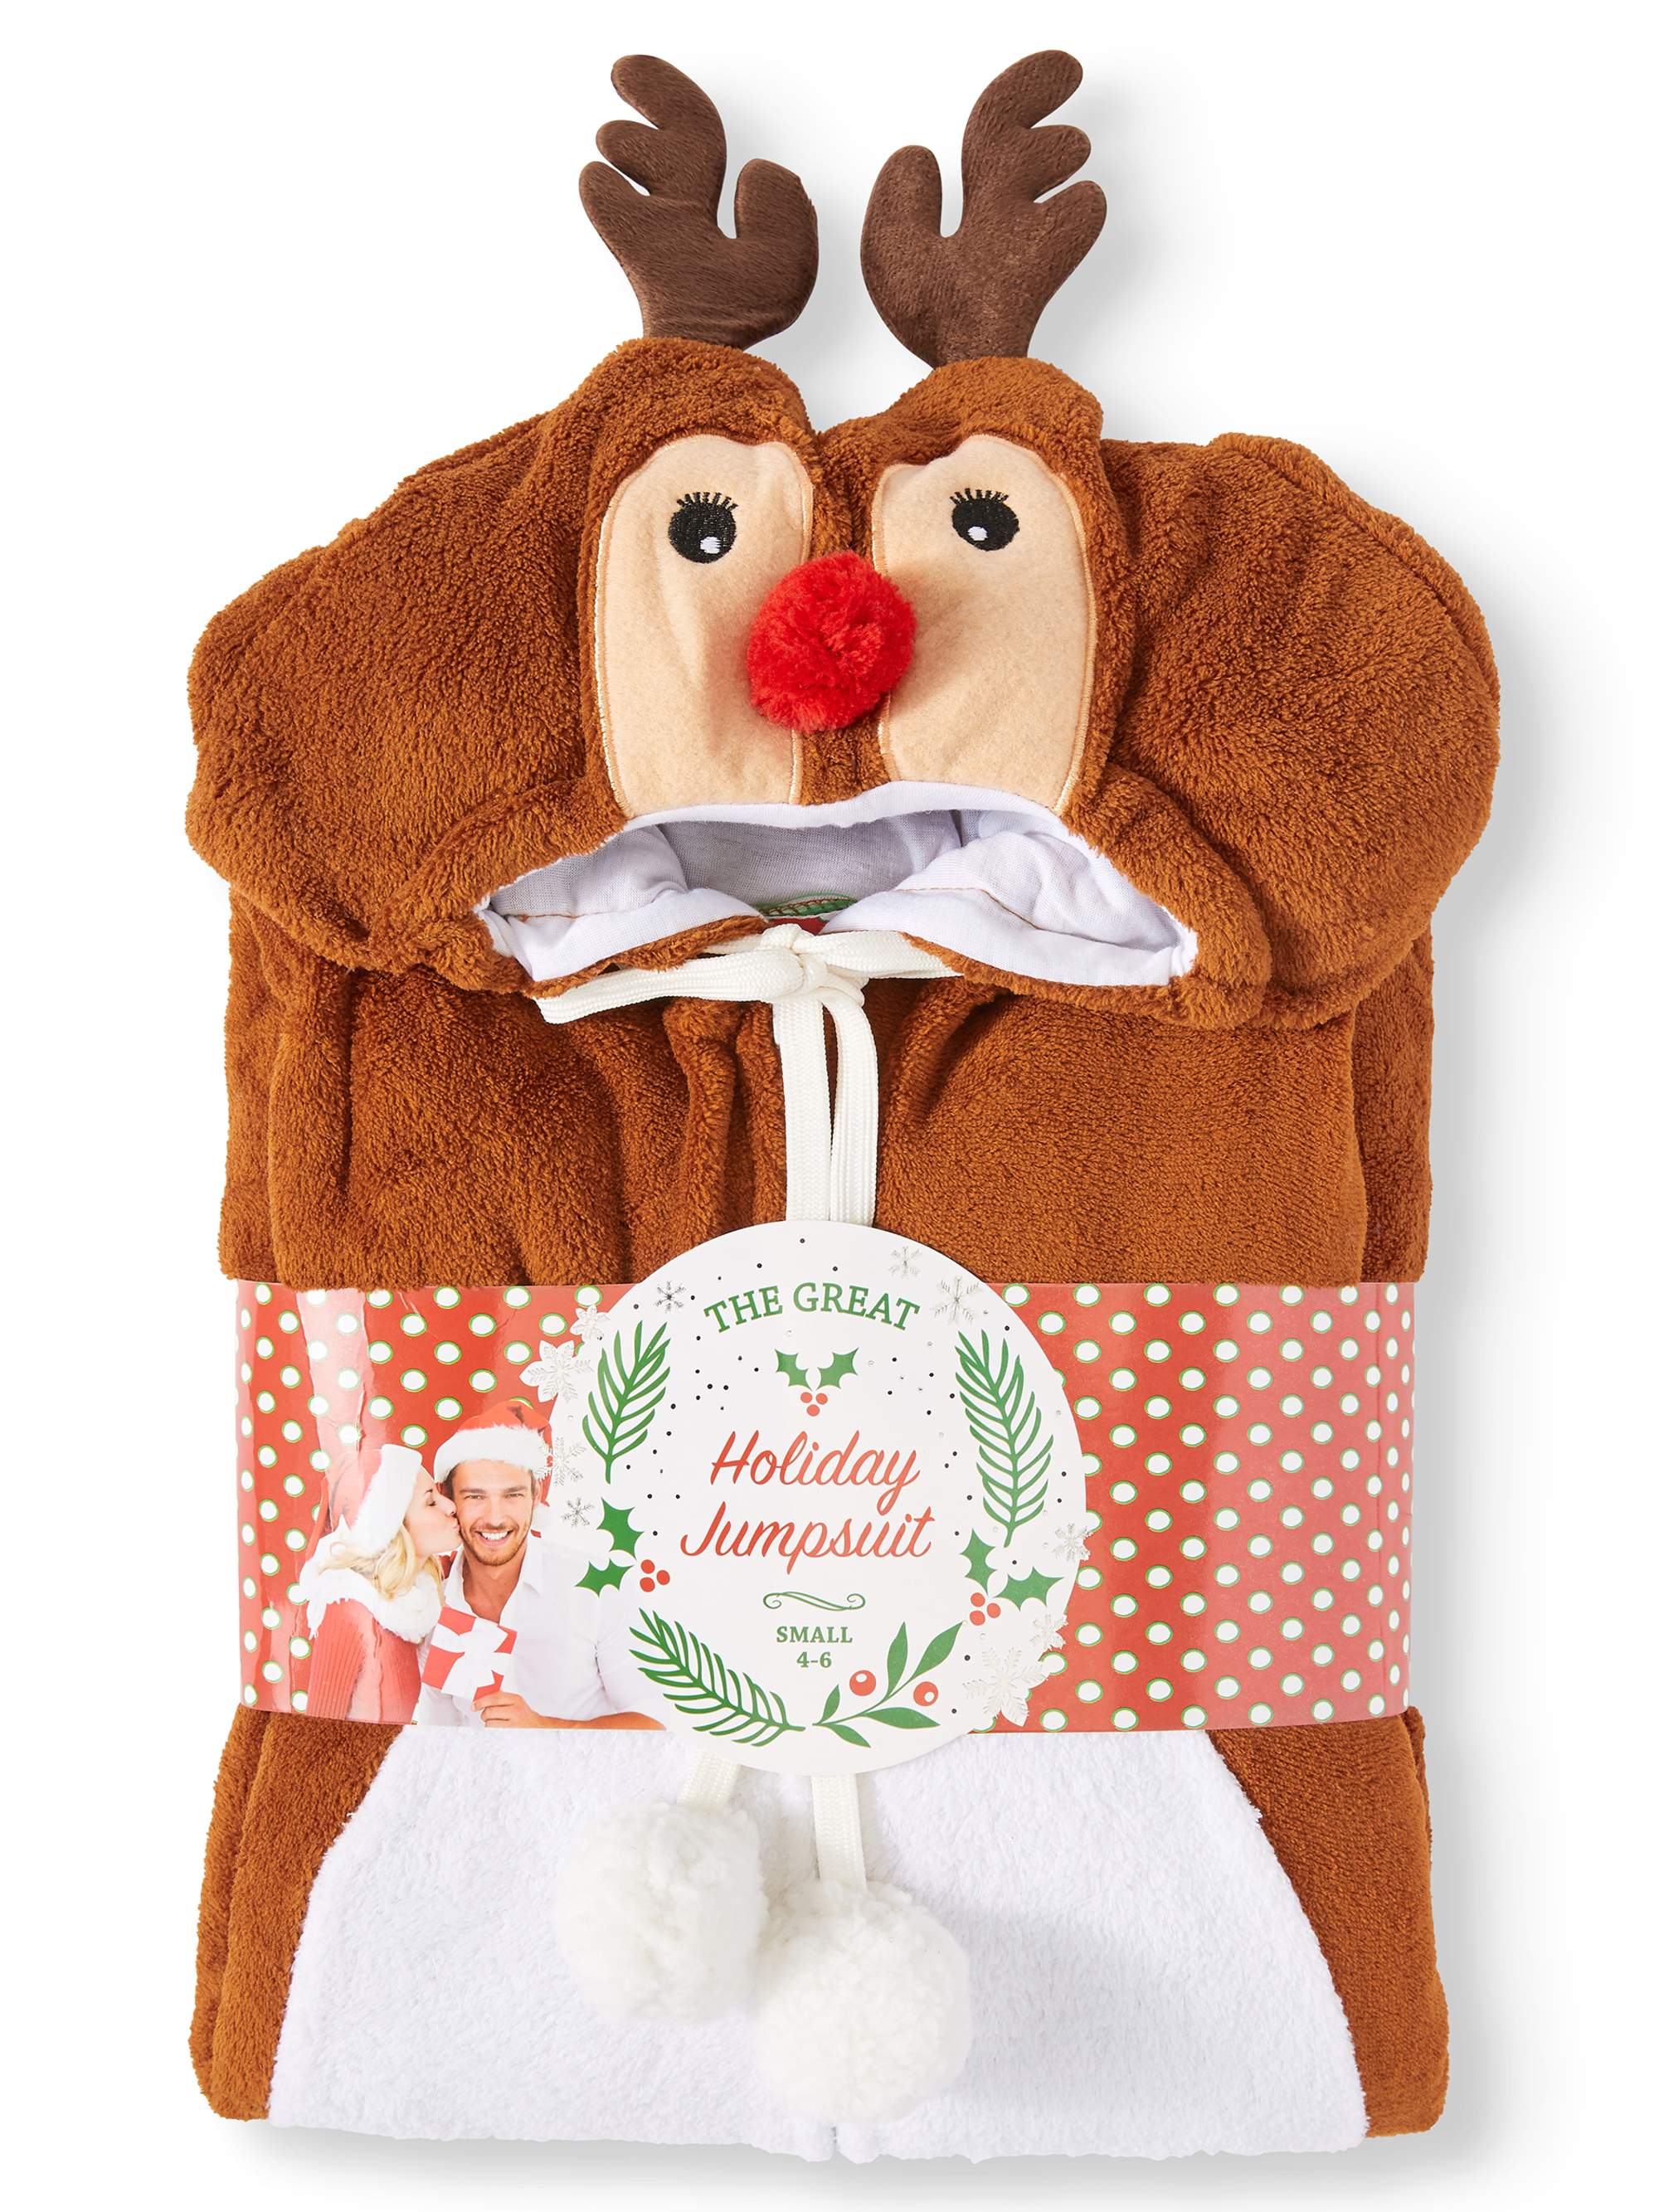 The Great Christmas Women's Christmas Edition Plush Hooded One Piece Union Suit - image 2 of 3